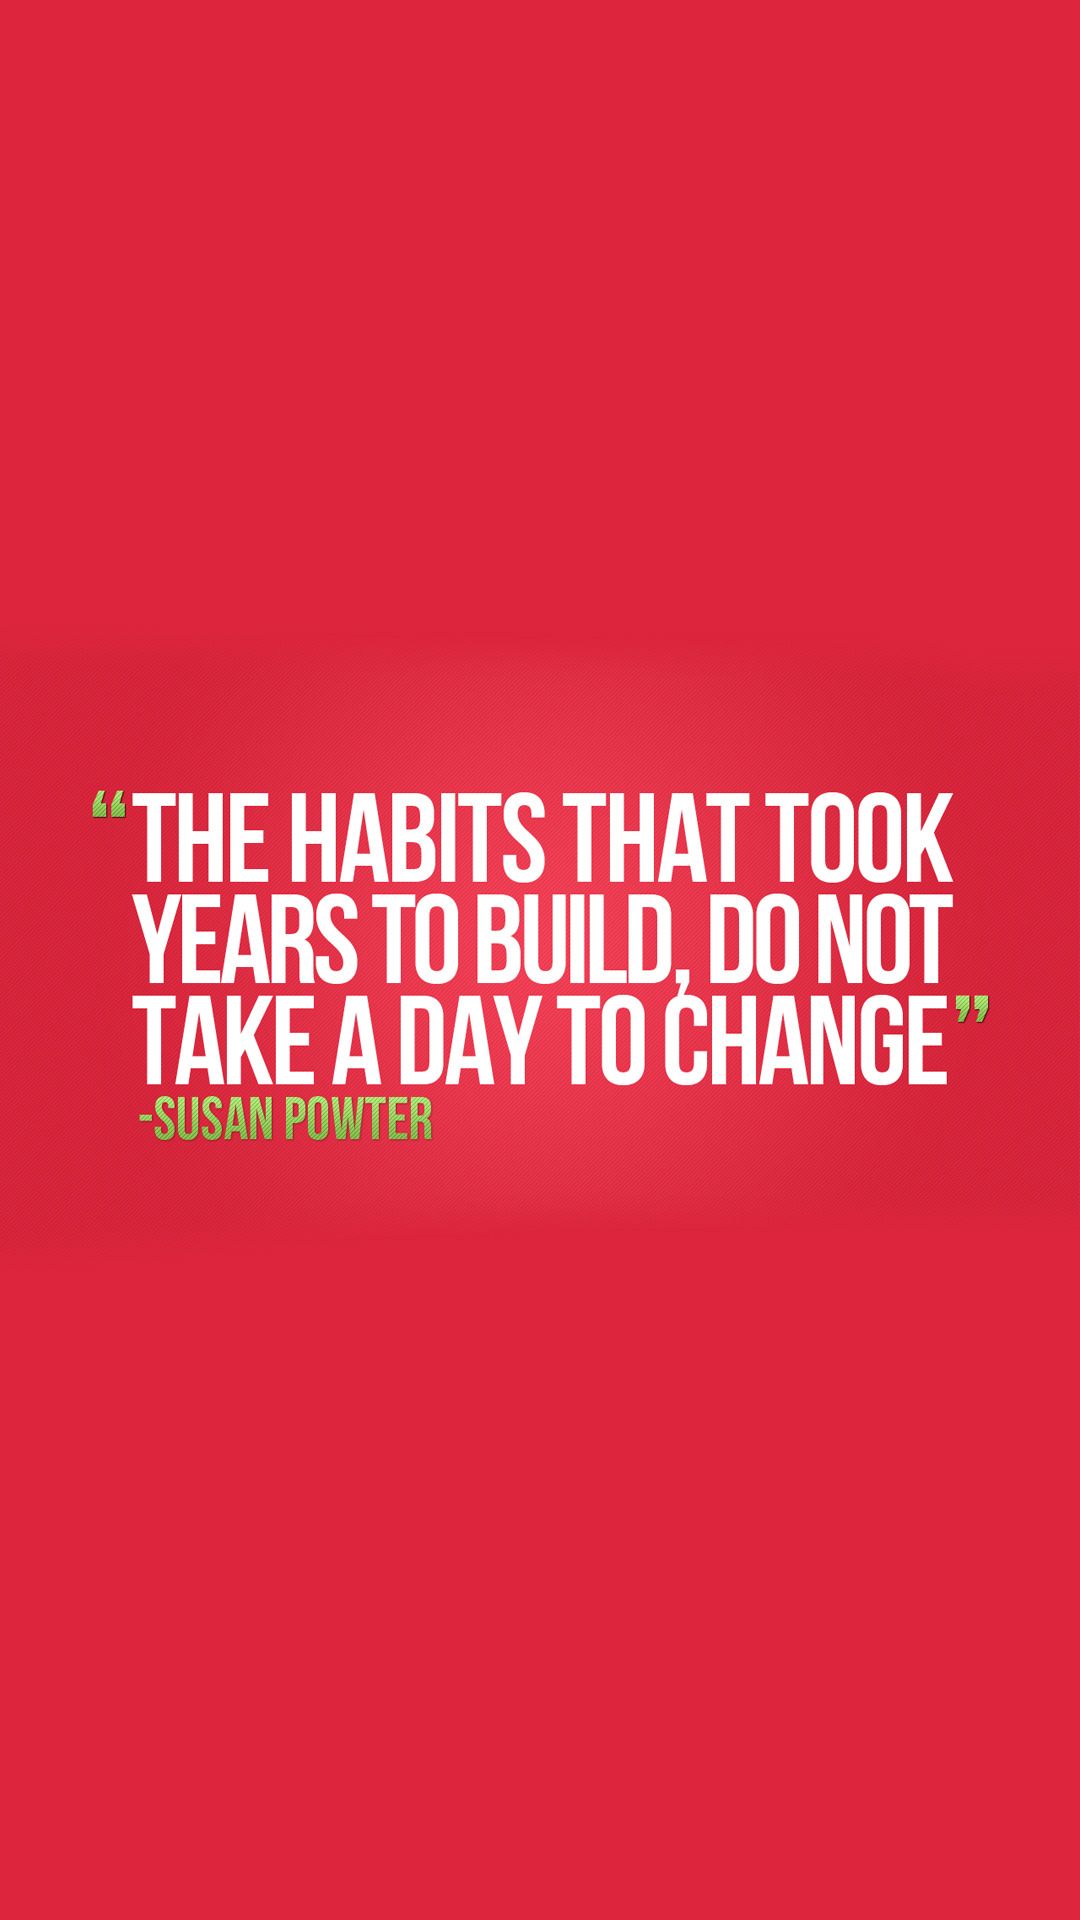 The Habits That Took Years To Build, Do Not Take A Day To Change